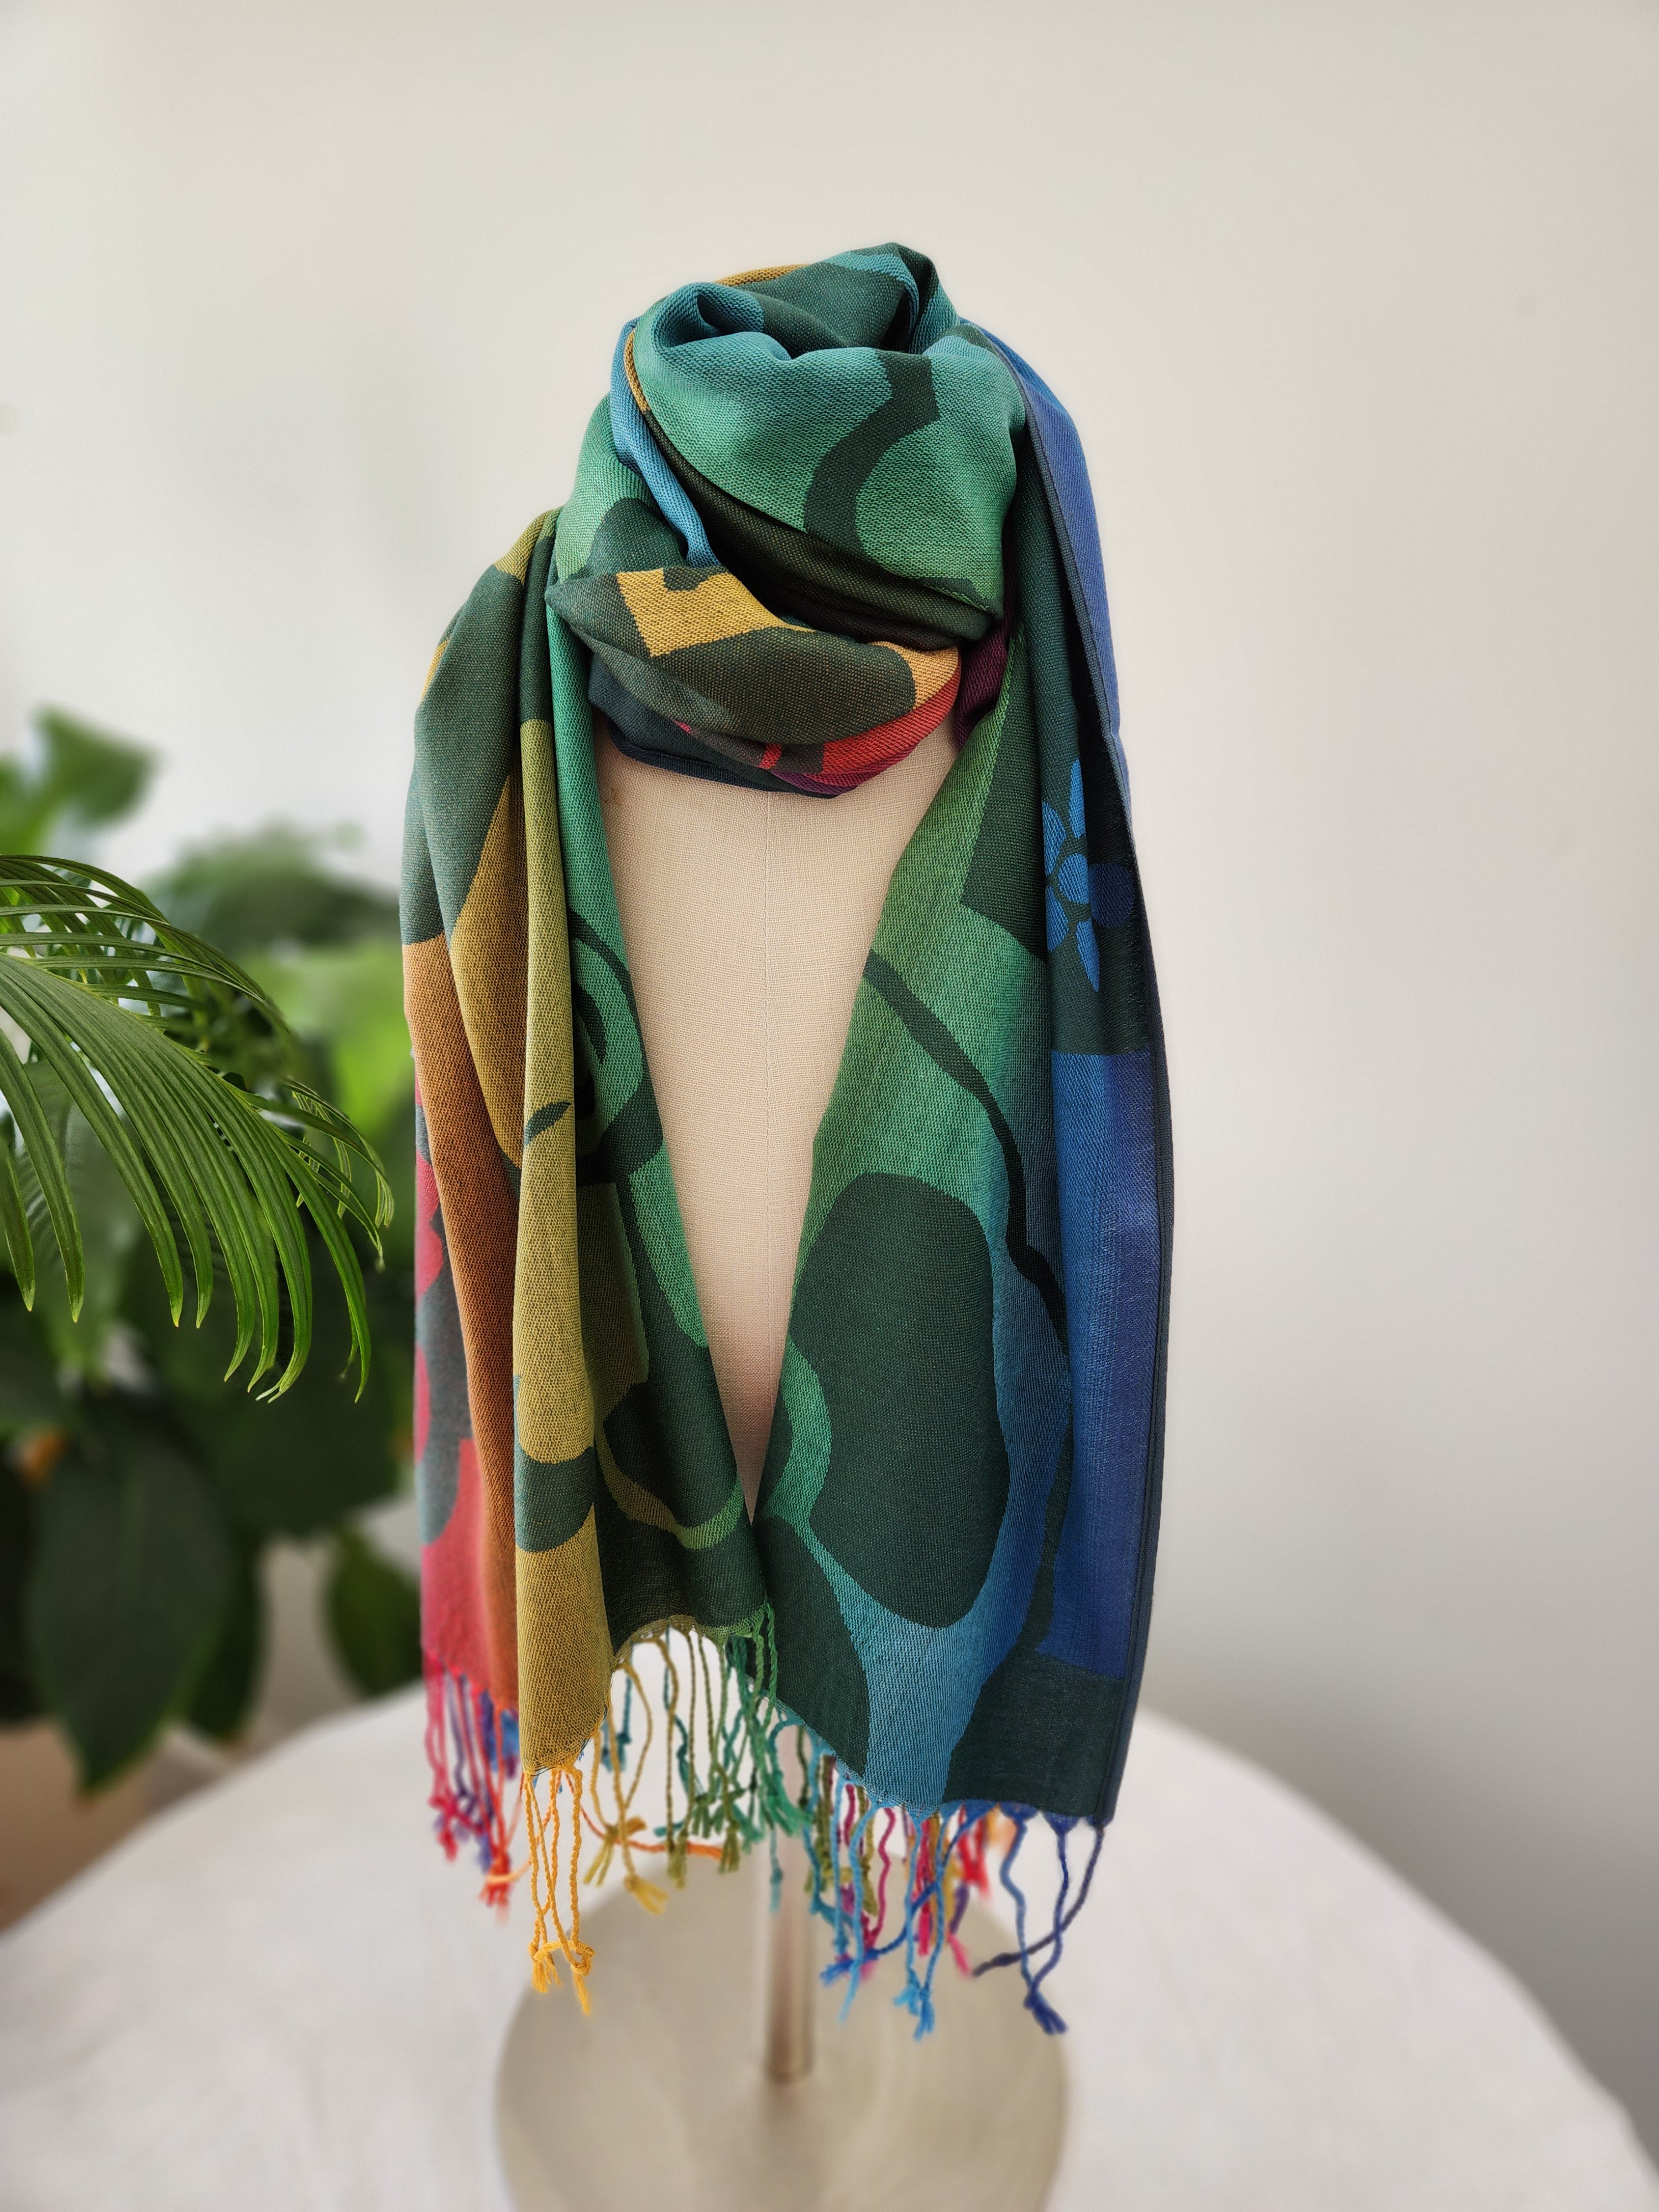 Buy palm-tree Colorful Women&#39;s Scarf in Vibrant, Tropical Colors Makes A Great Holiday Gift